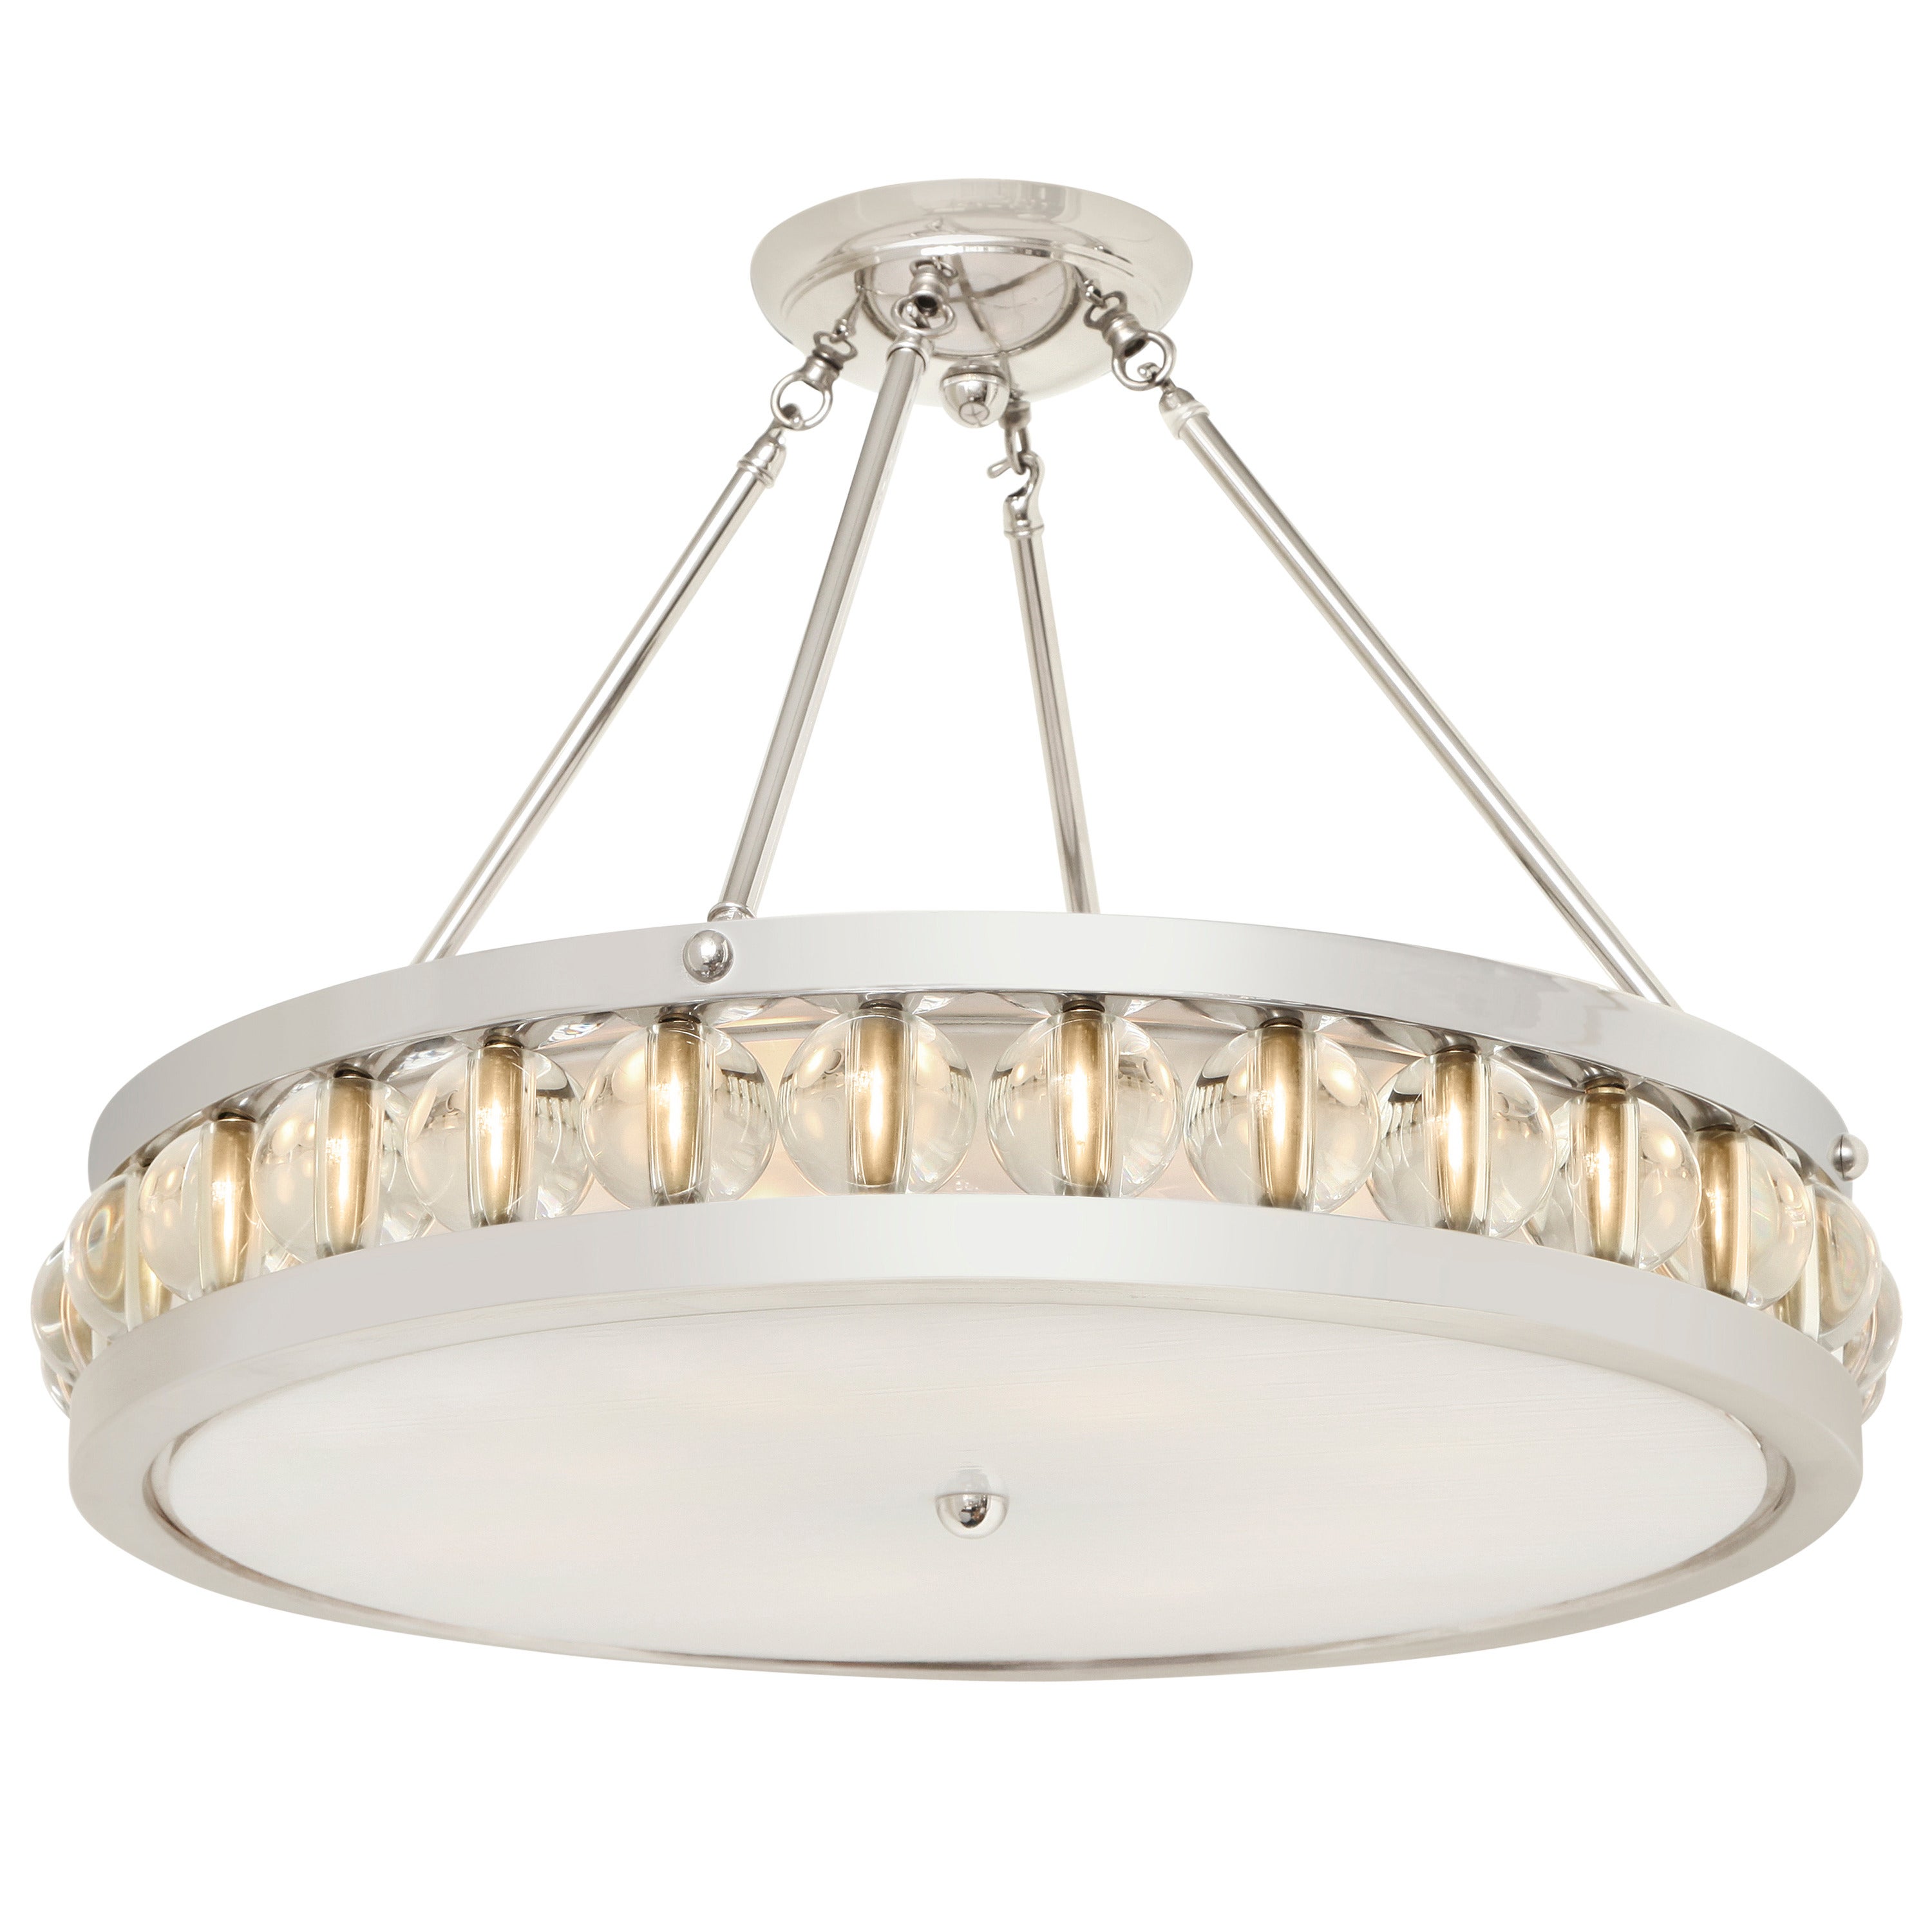 Tambour Pendant Fixture with Rods by David Duncan, Polished Nickel, 24" Frame